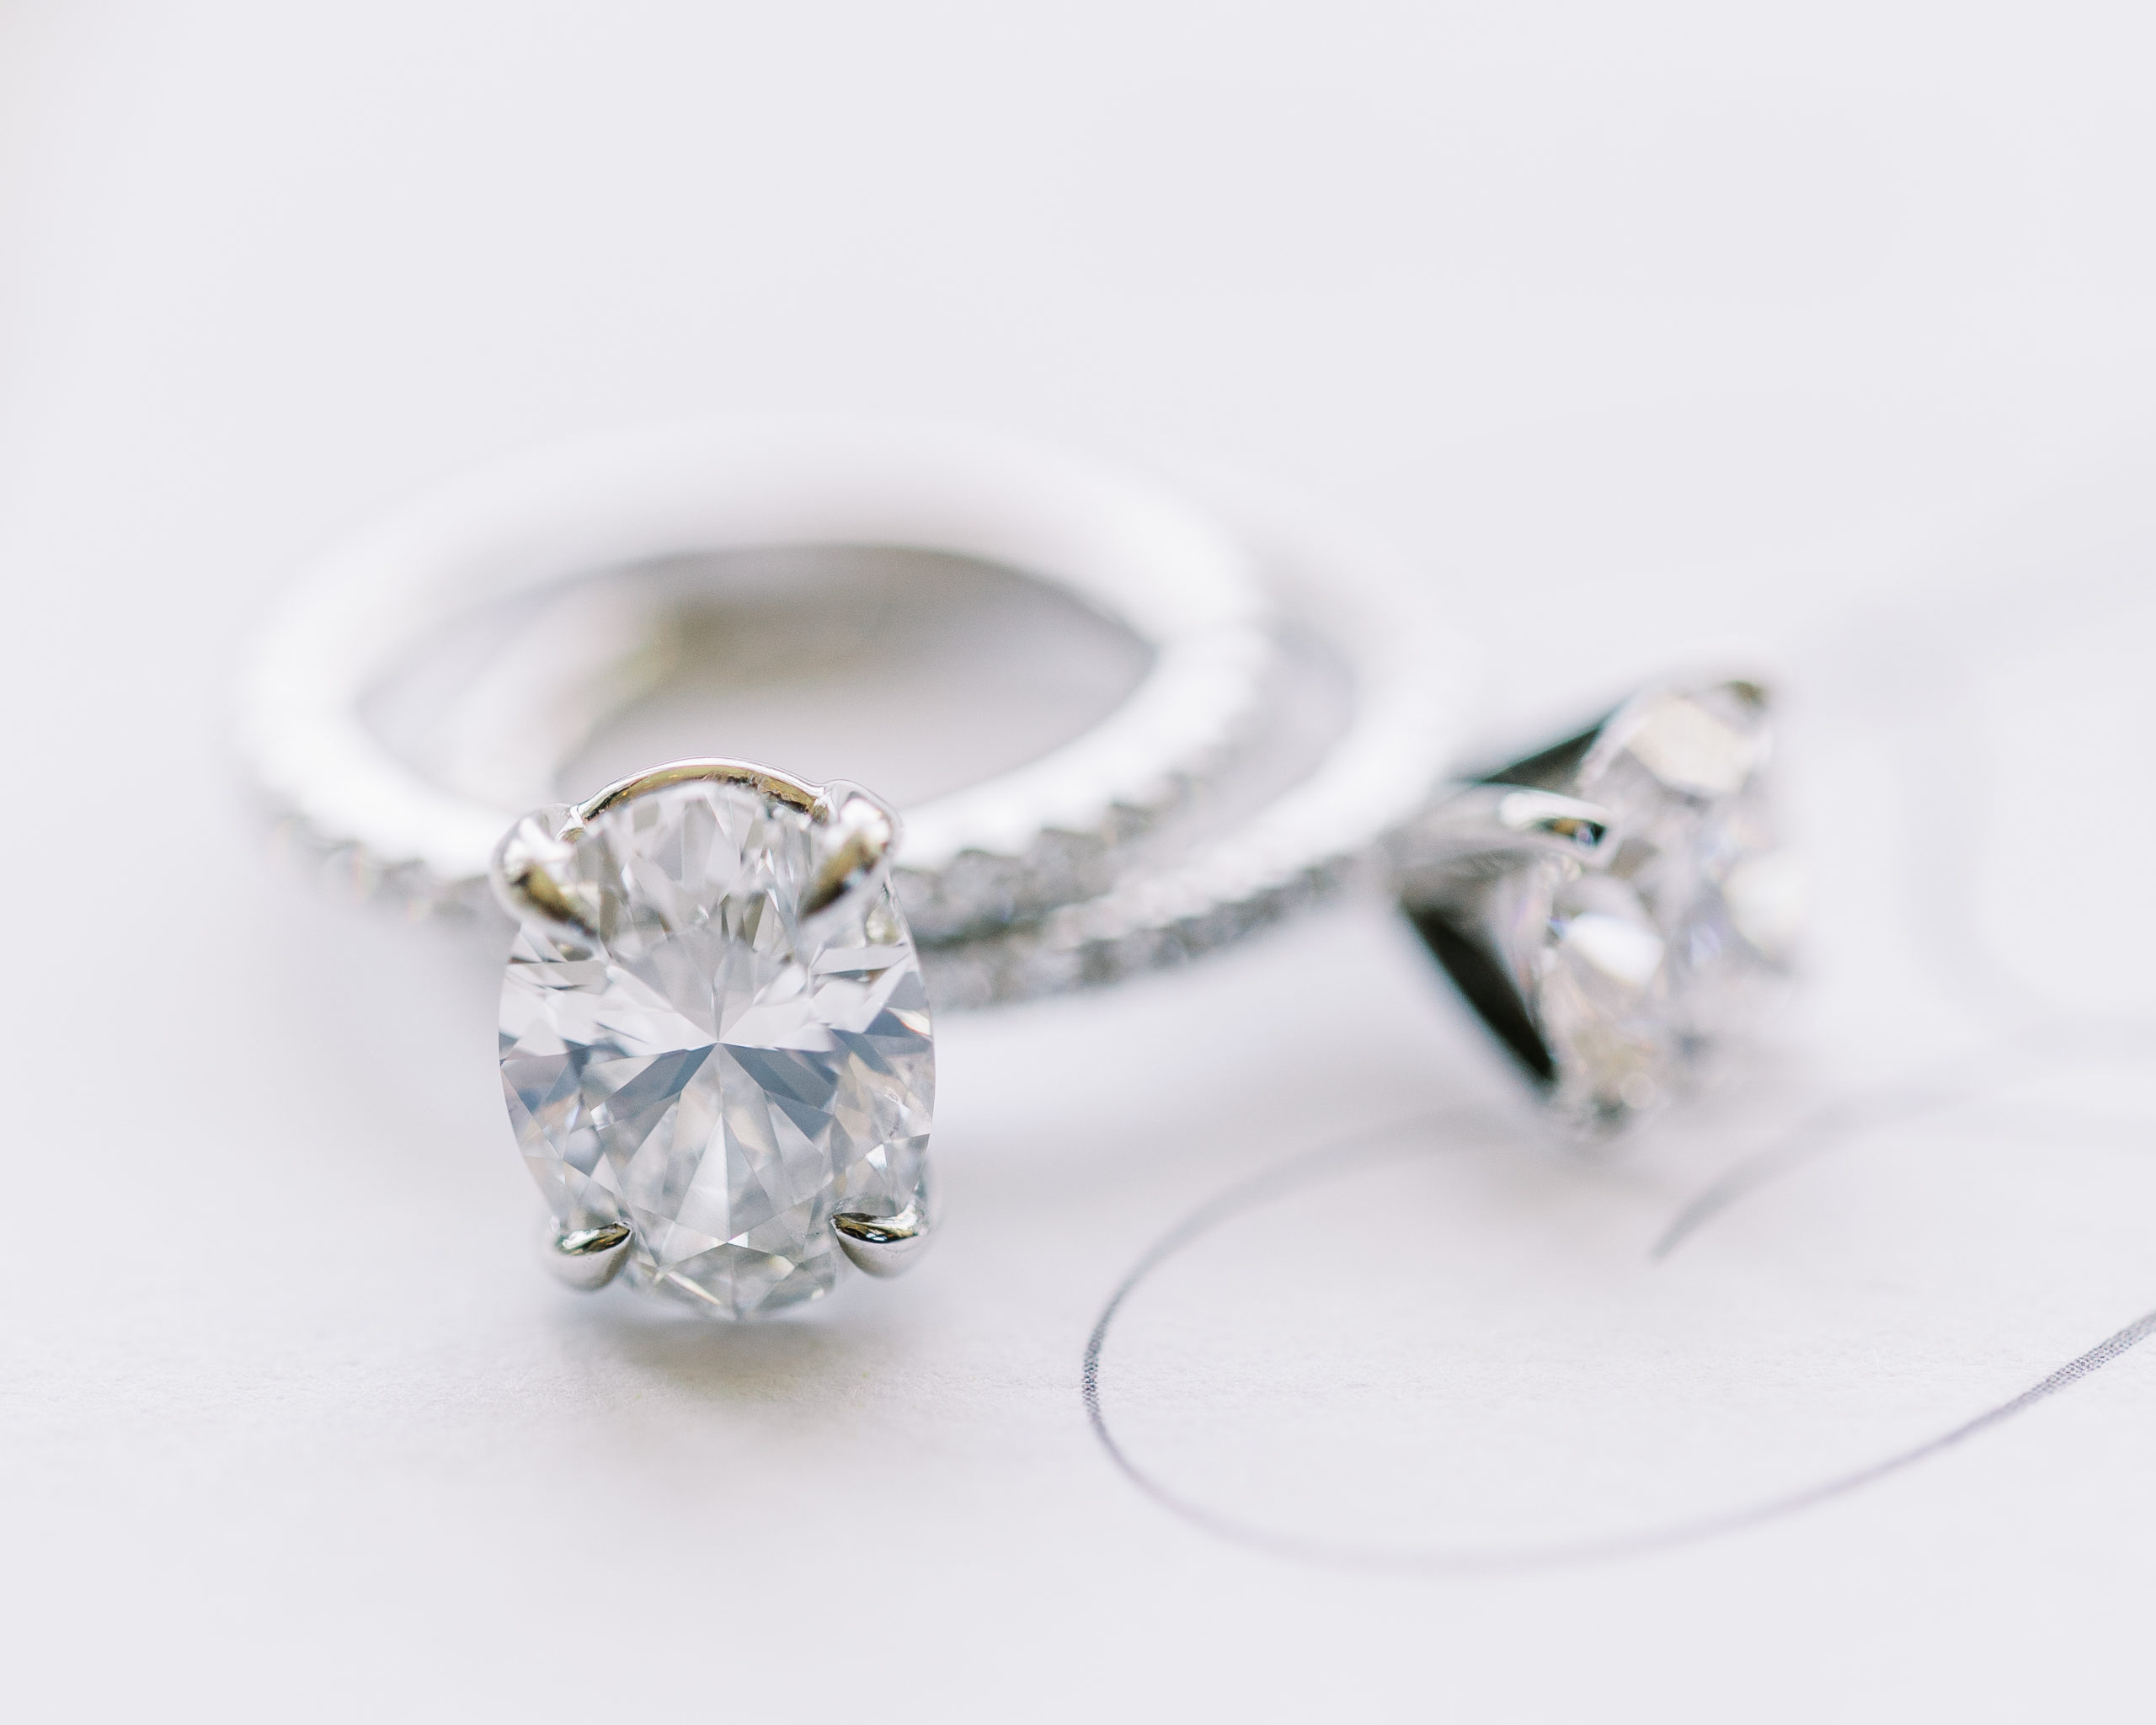 Up close view of wedding rings for a Romantic Park Chateau Wedding Photography